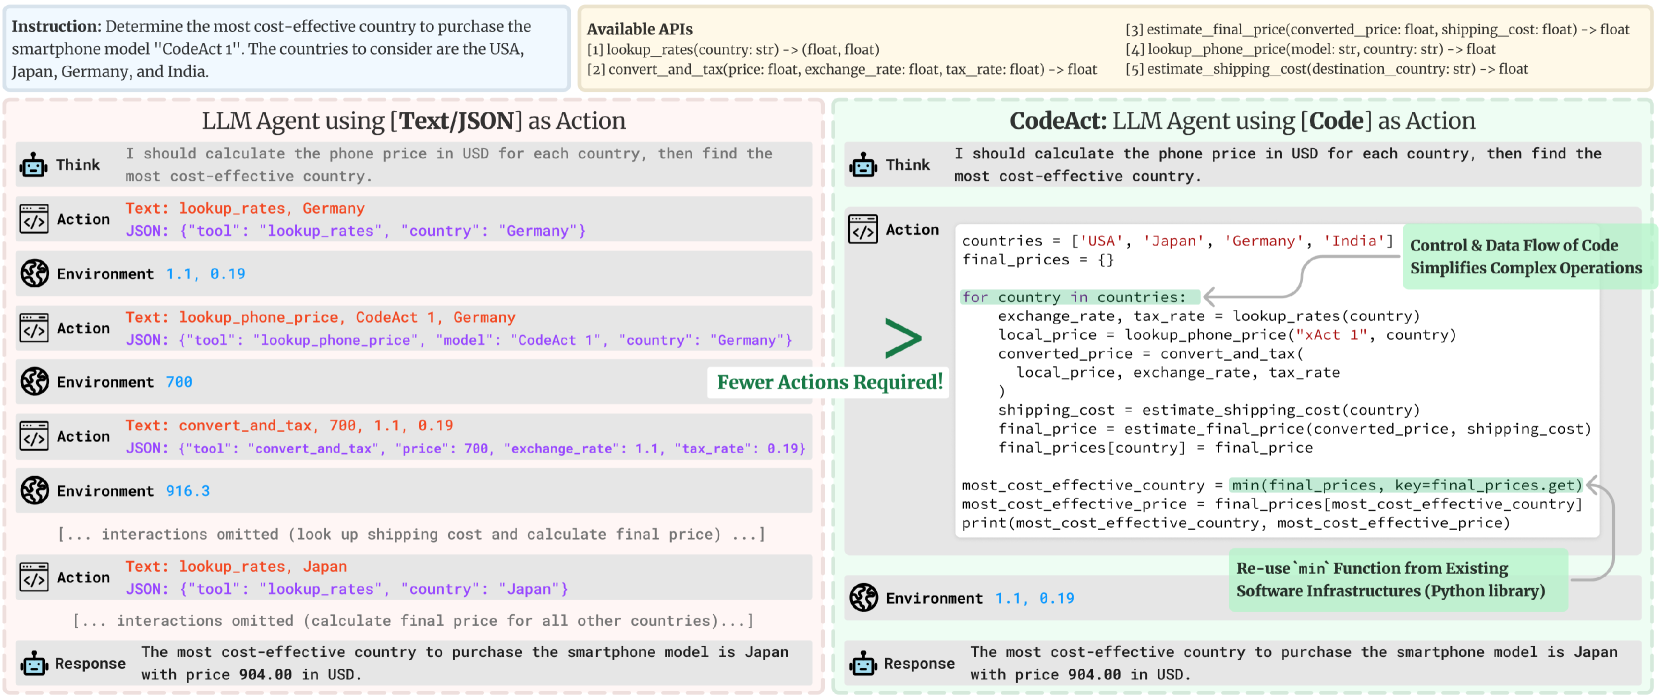 Executable Code Actions Elicit Better LLM Agents